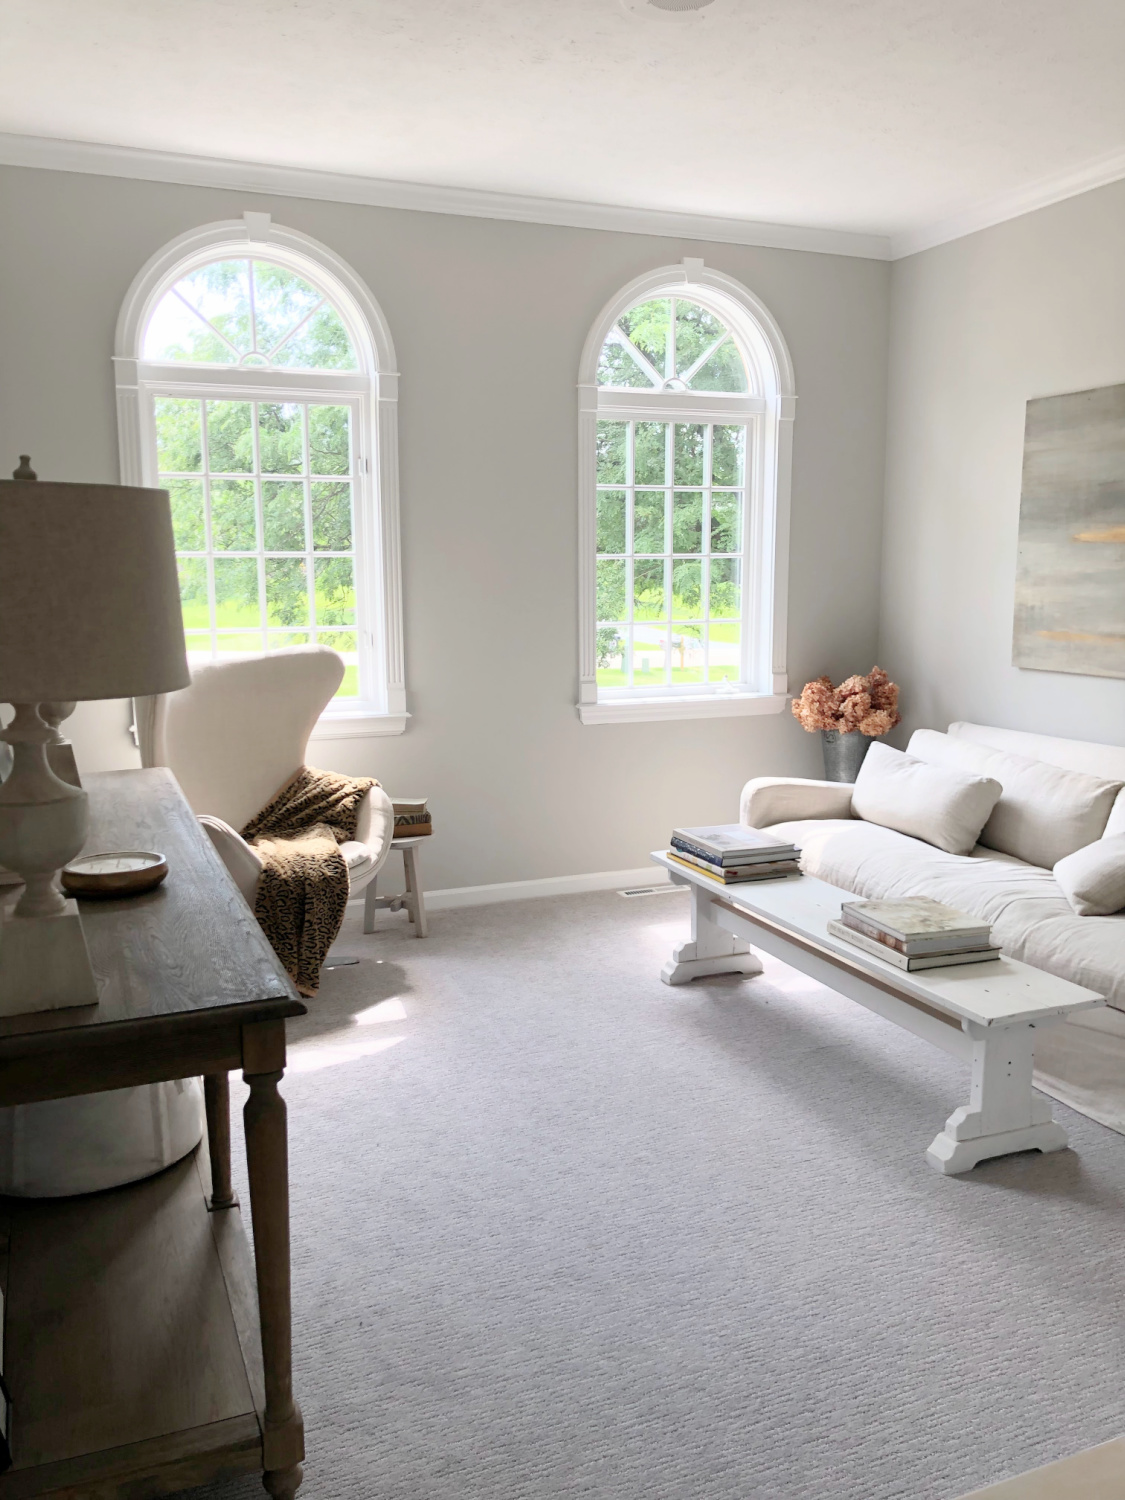 SW Repose Gray in living room with Belgian linen sofa, egg chair, and arched windows - Hello Lovely Studio. #reposegray #belgianstyle